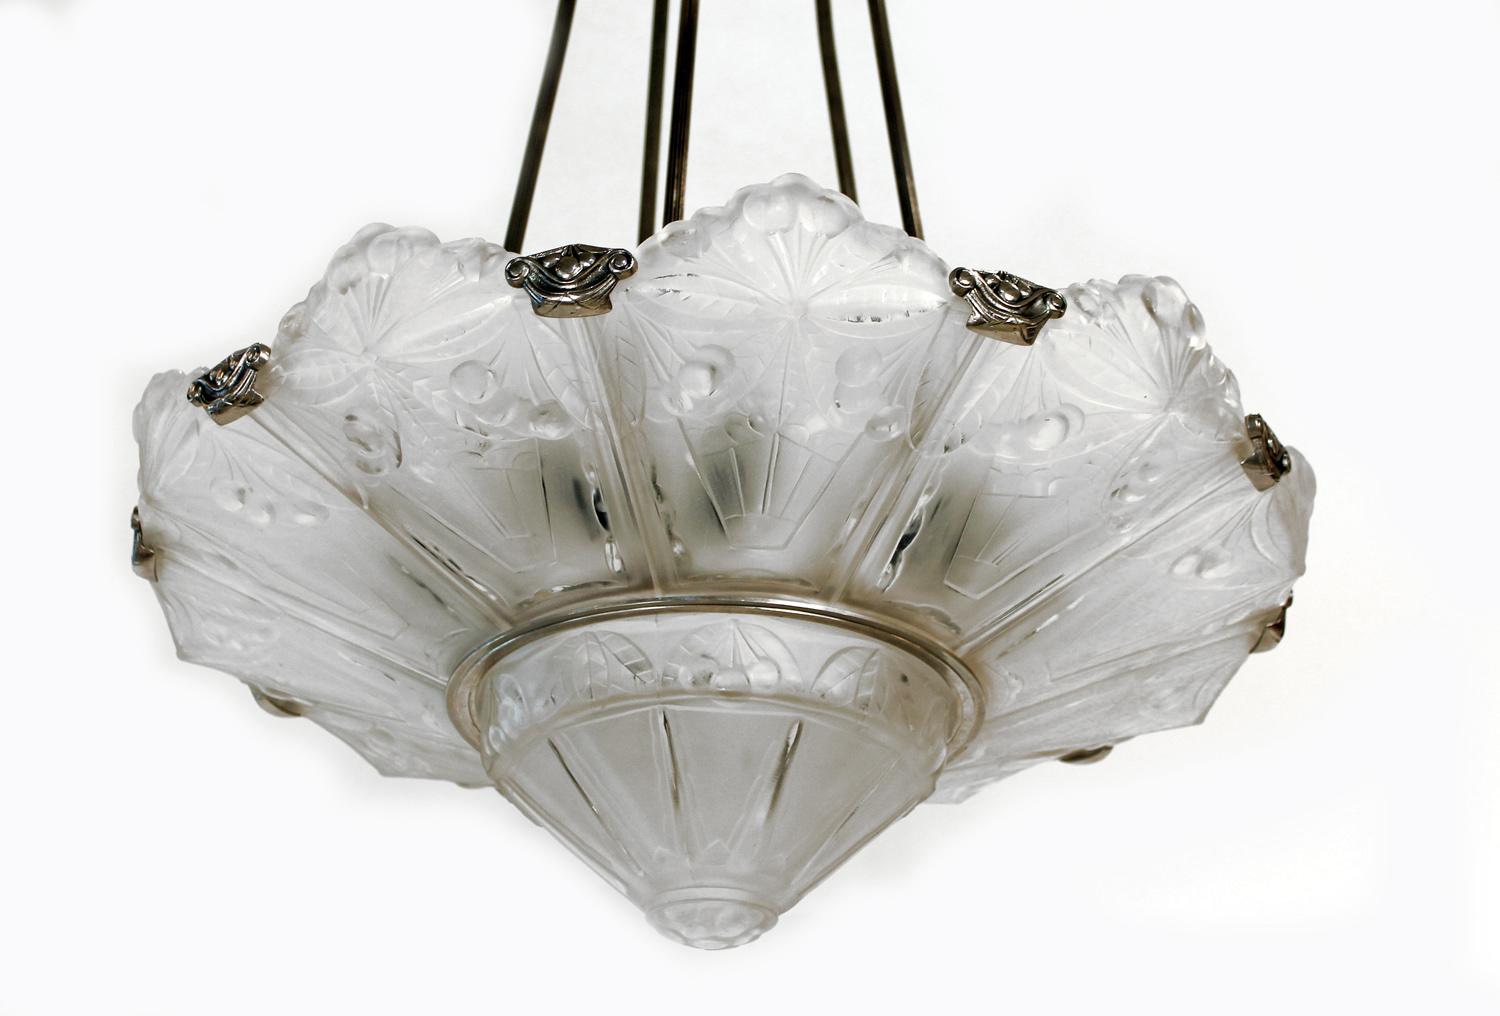 Art Deco chandelier made out a metal frame and frosted molded panels and center plate by Sabino-Paris.
Made in France 
circa 1930
Signature: Sabino 4797P FRANCE.